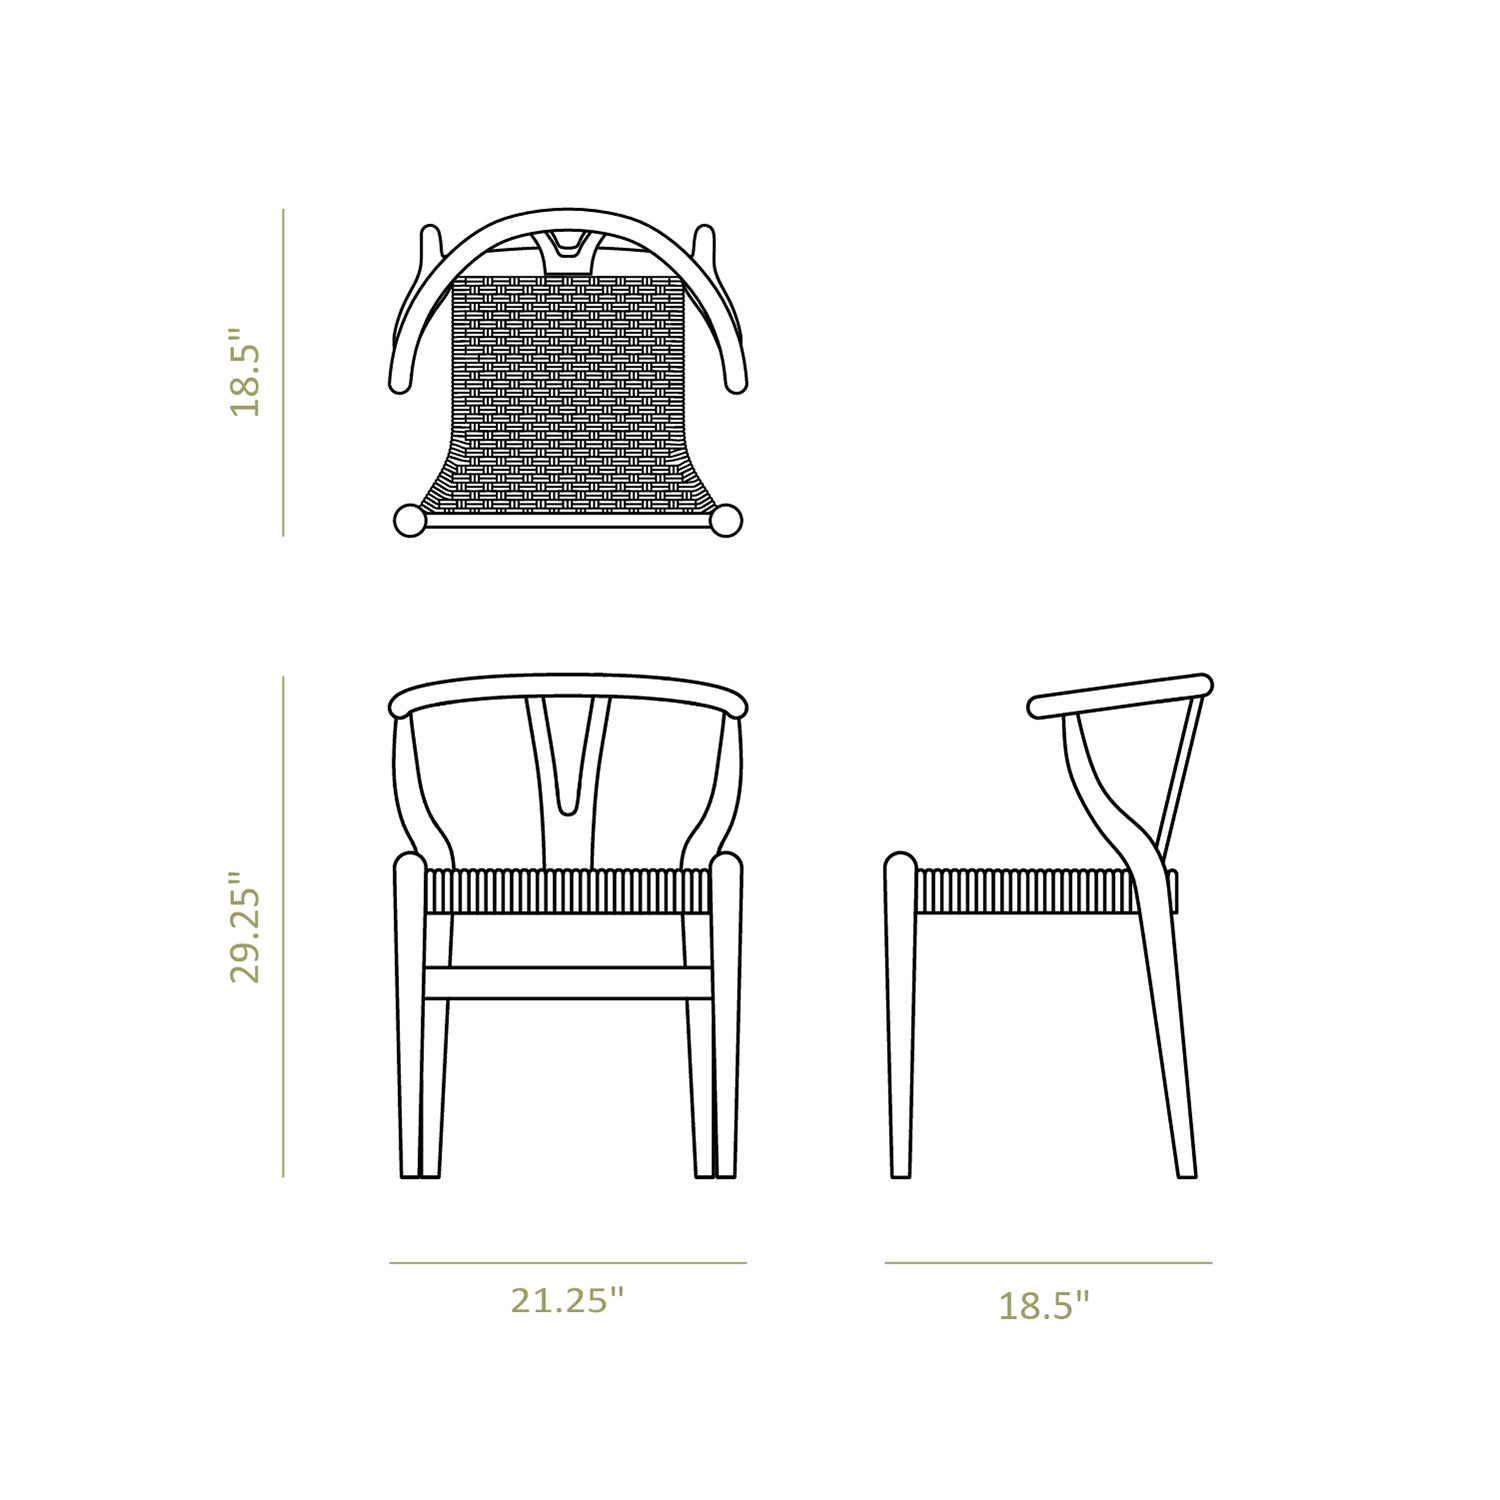 Neuwood Living Ming Armless Stack Dining Chair Dimensions